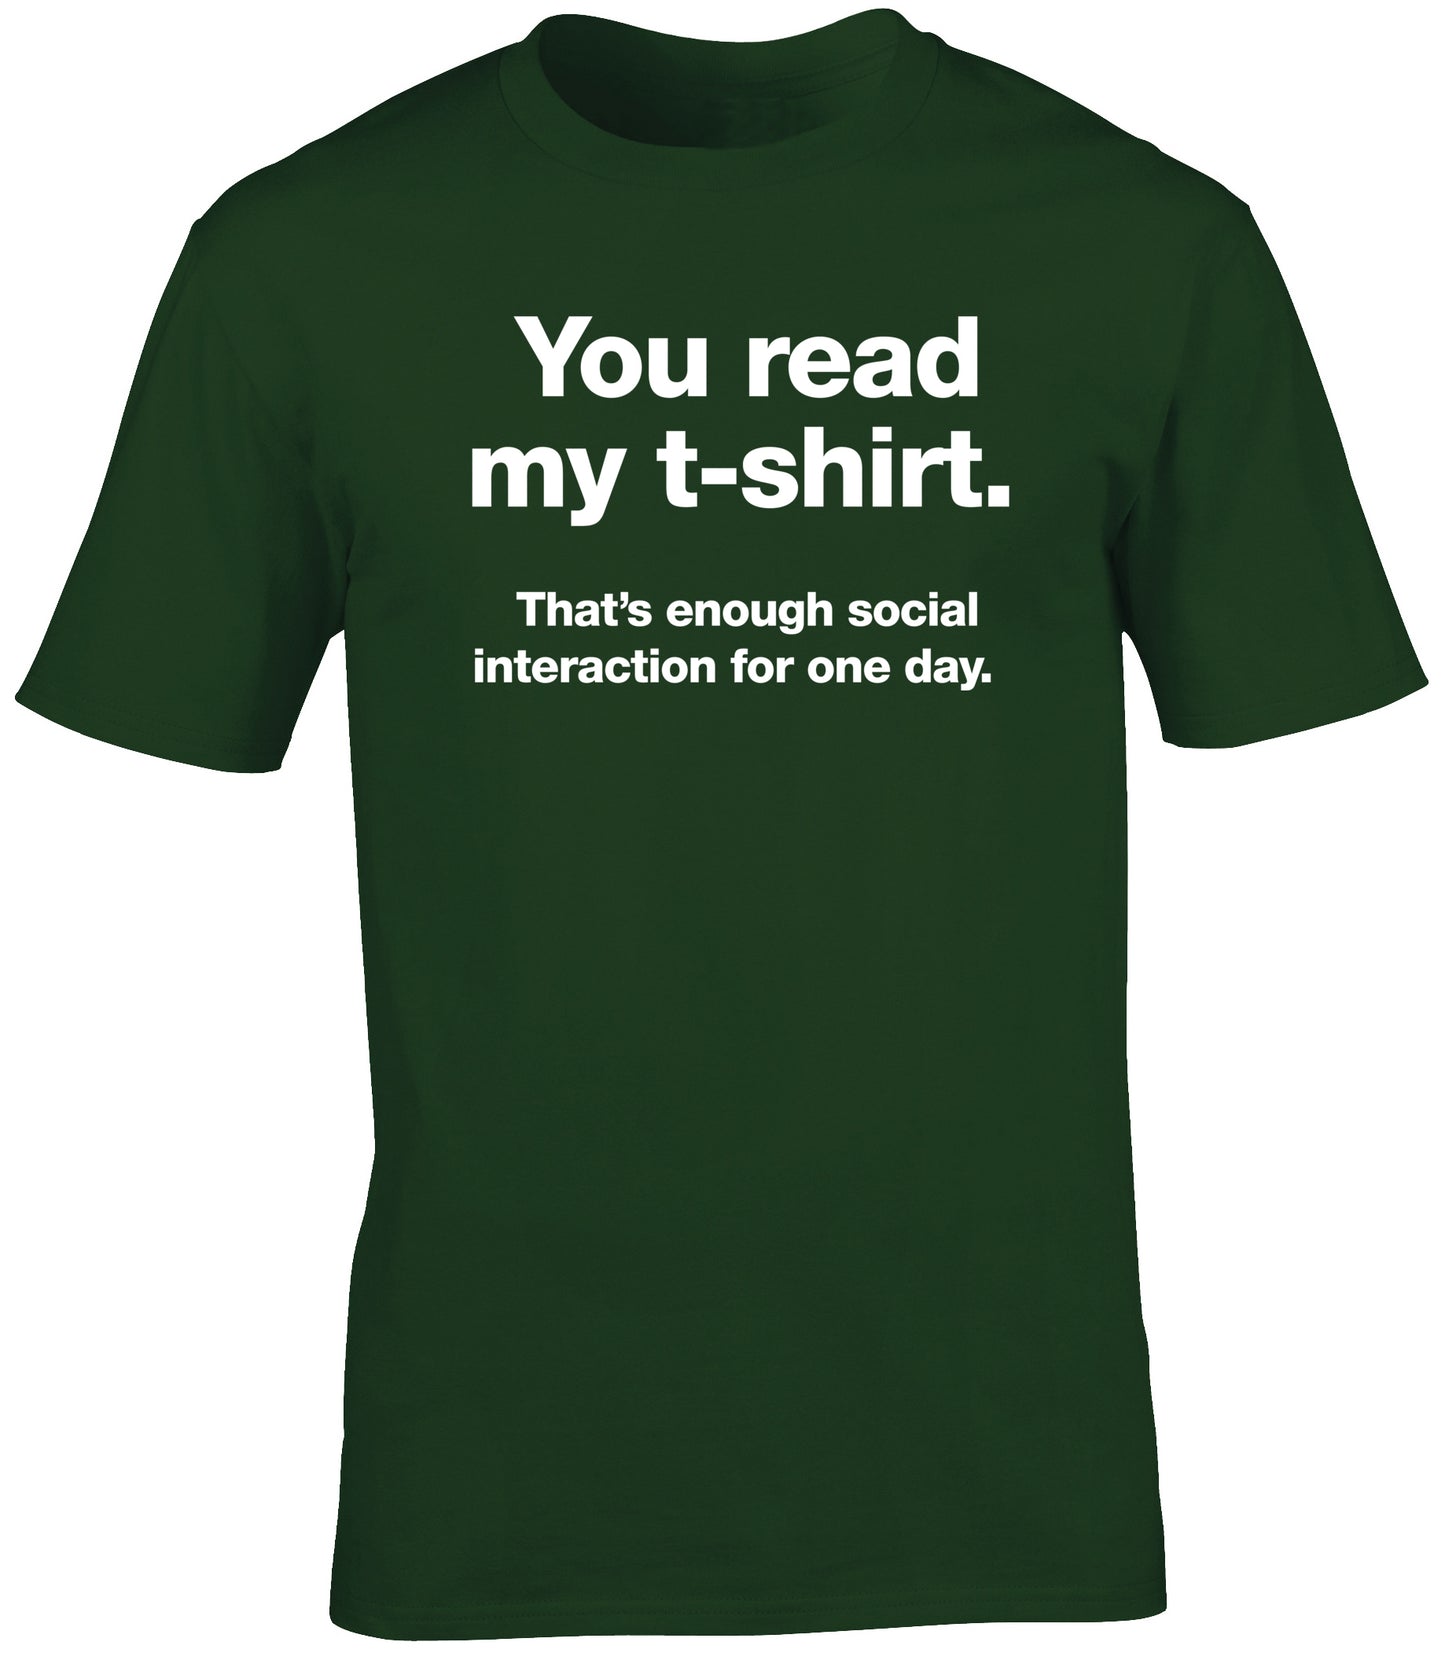 you read my t-shirt that's enough social interaction for one day unisex t-shirt